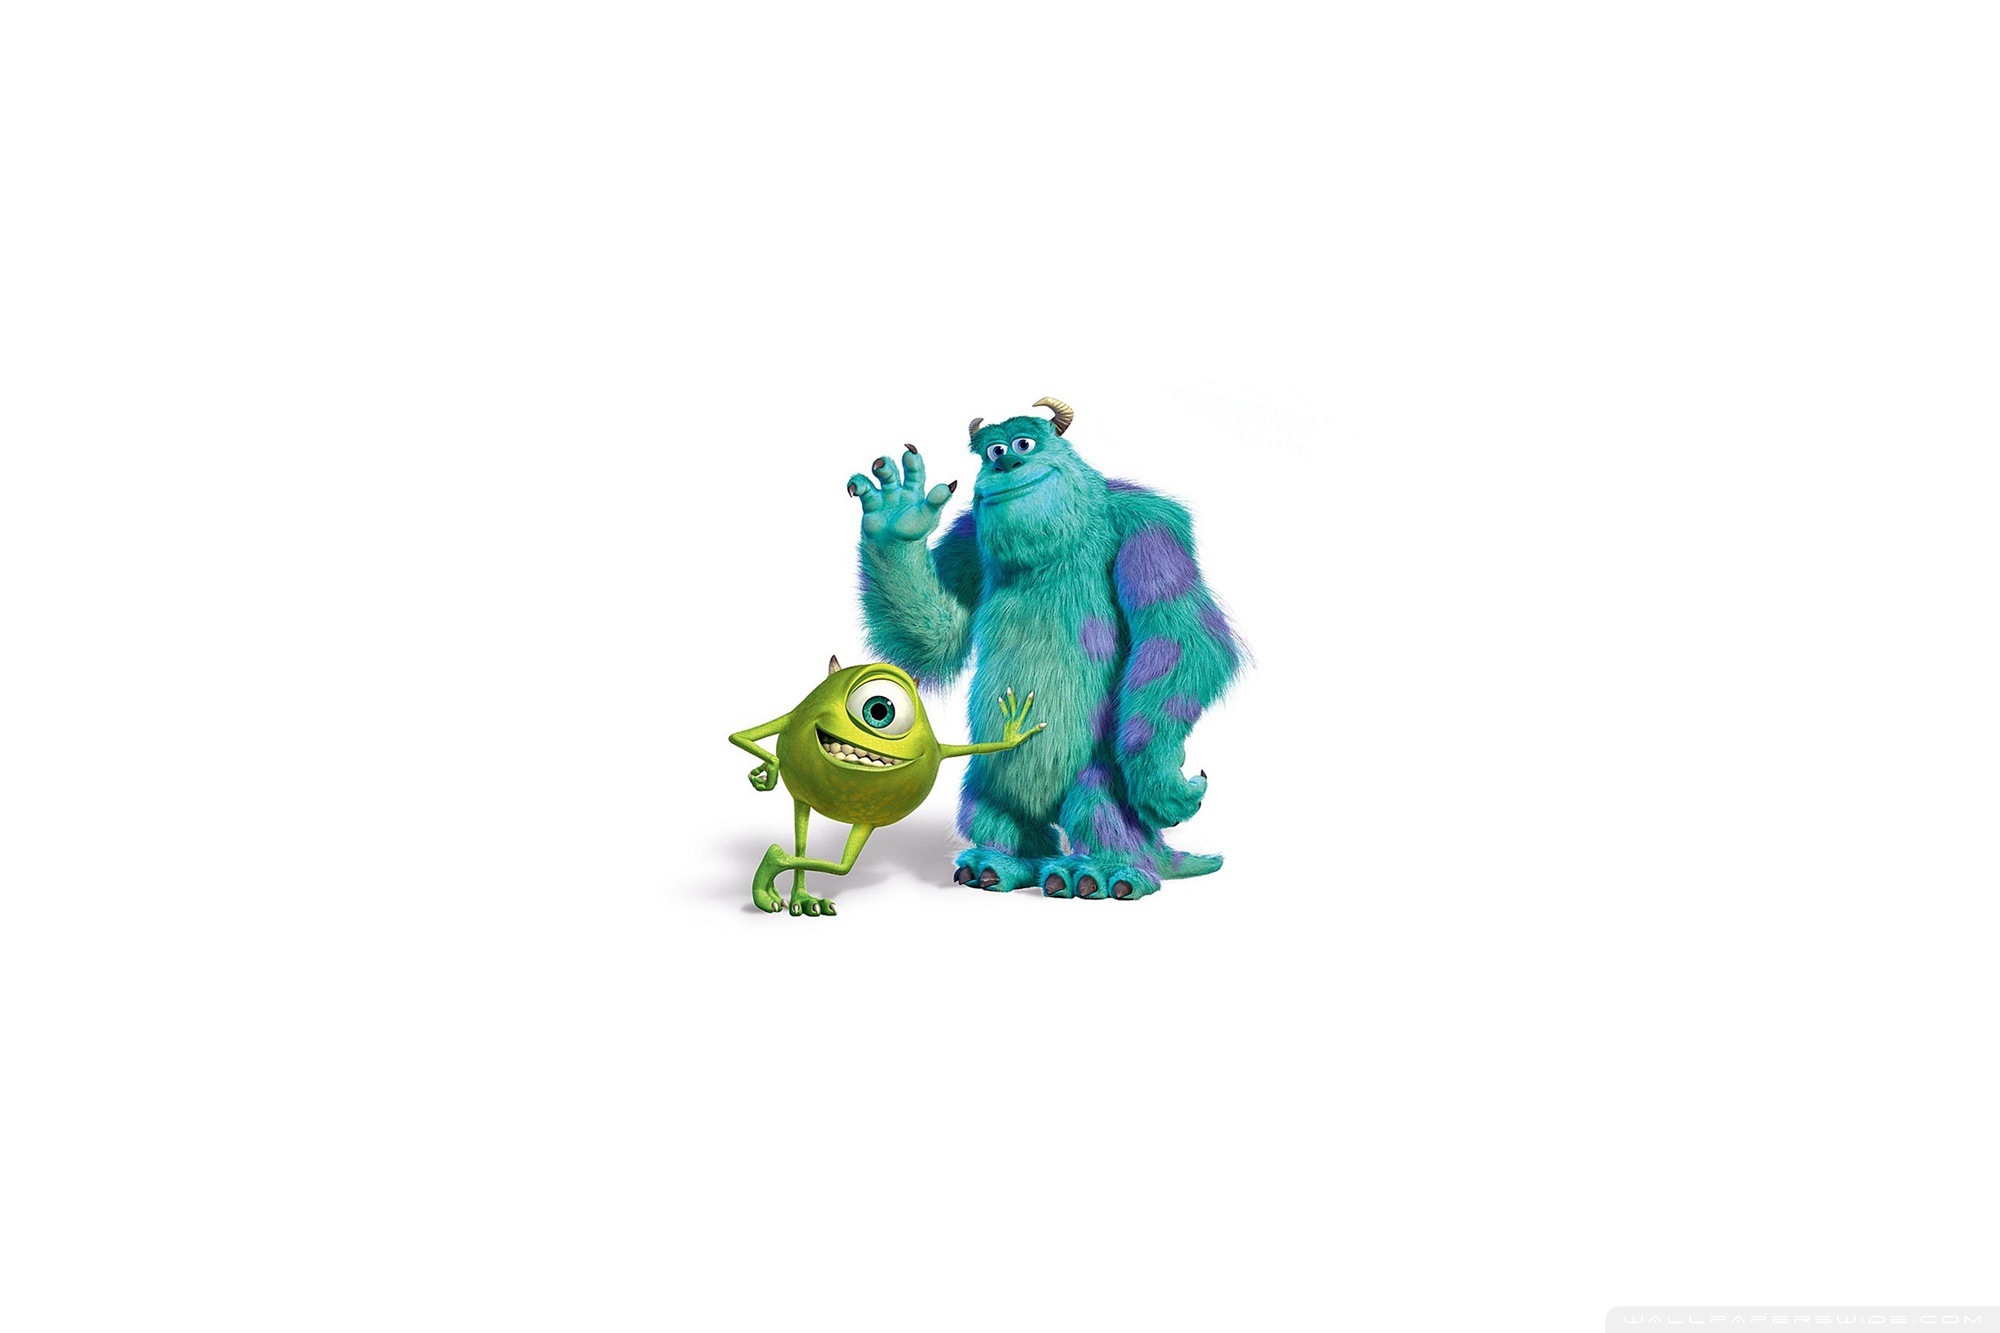 Monsters Inc Sulley And Mike 4K HD Desktop Wallpaper for 4K 2000x1333